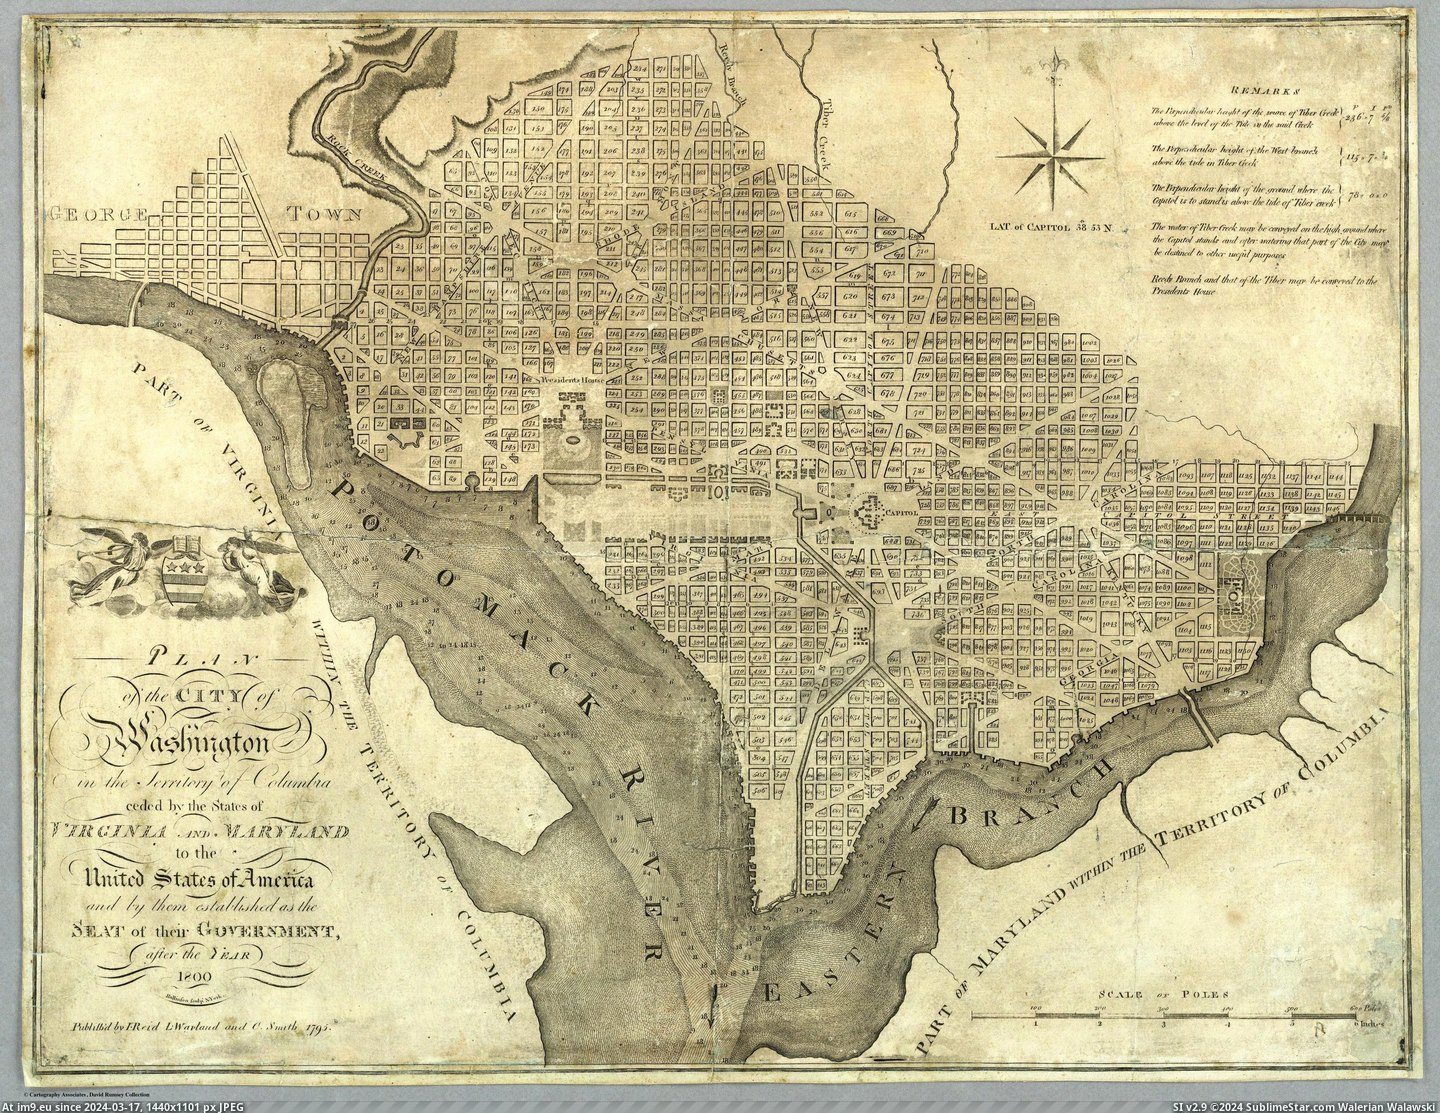 #City #States #Washington #Virginia #Maryland #Unite #Ceded #Columbia #Plan #Territory [Mapporn] “Plan of the City of Washington in the Territory of Columbia ceded by the States of Virginia And Maryland to the Unite Pic. (Image of album My r/MAPS favs))